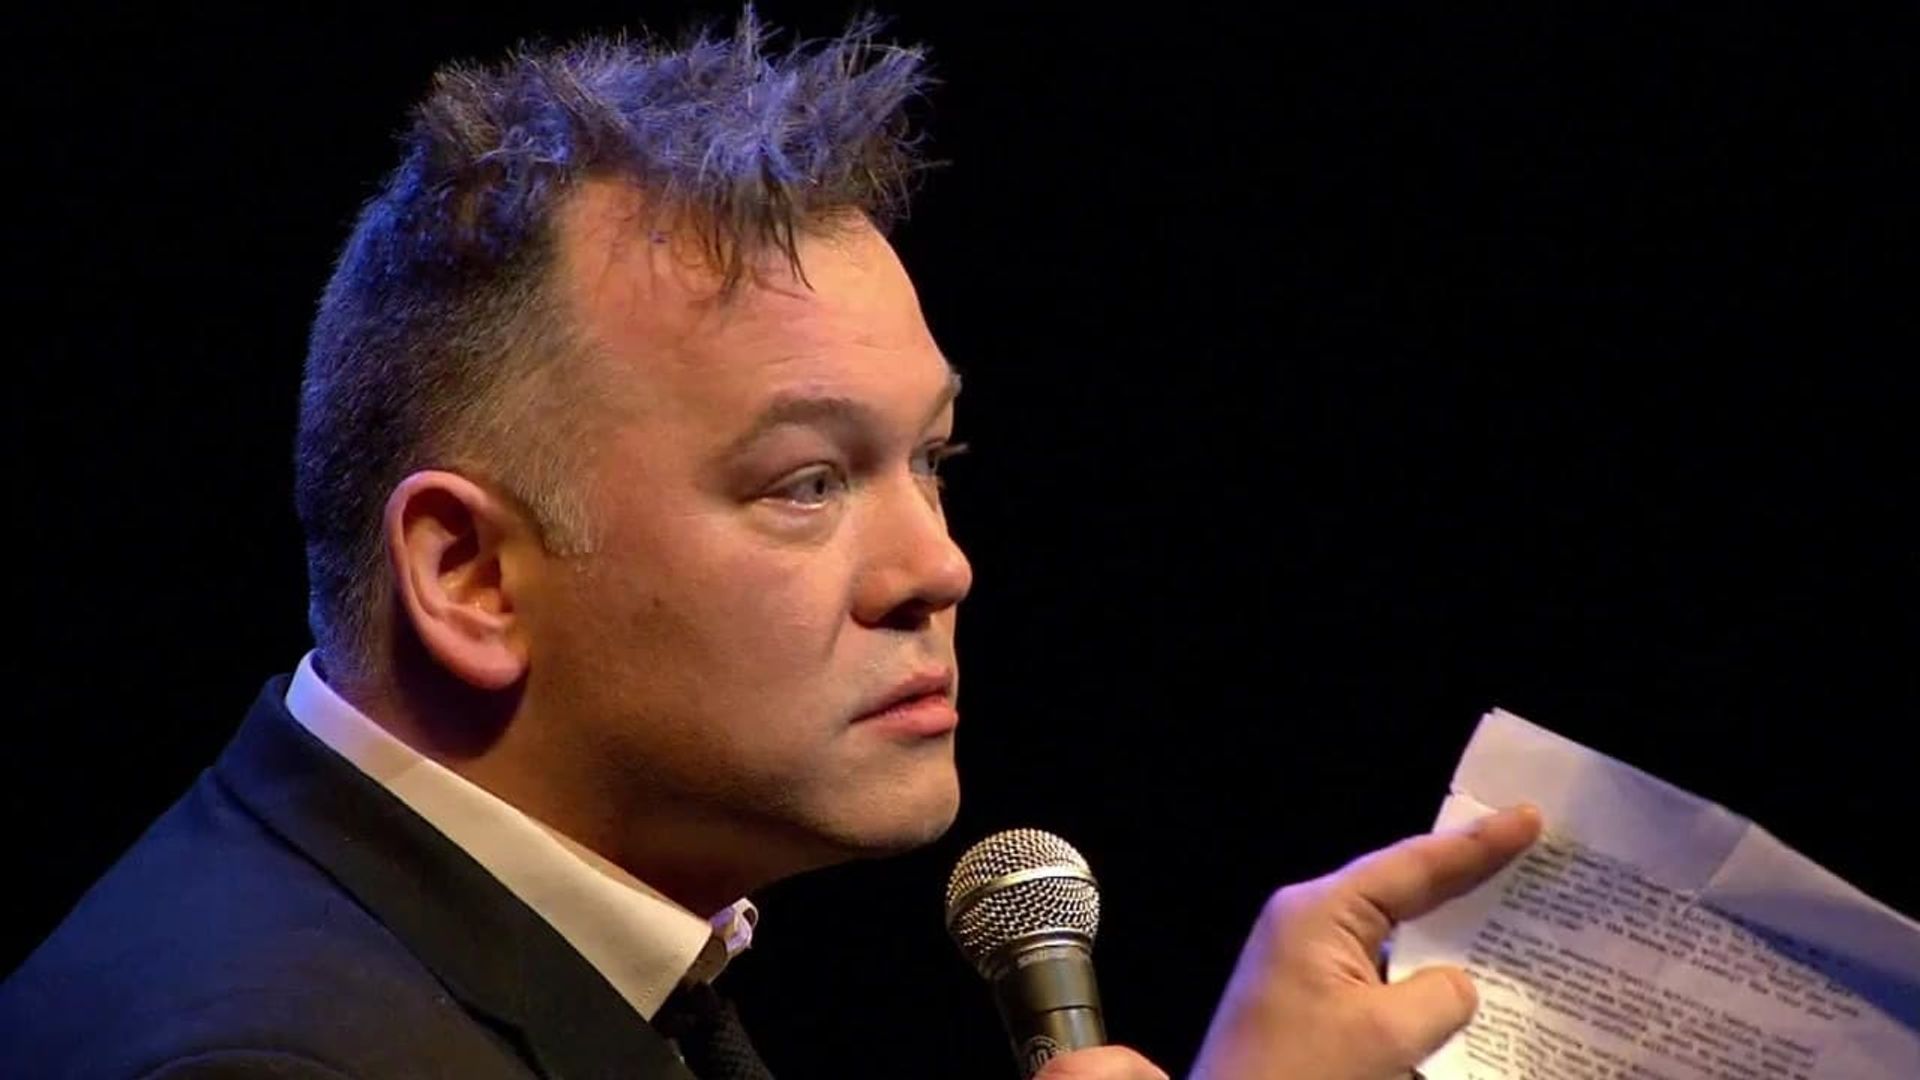 Stewart Lee: If You Prefer a Milder Comedian, Please Ask for One background